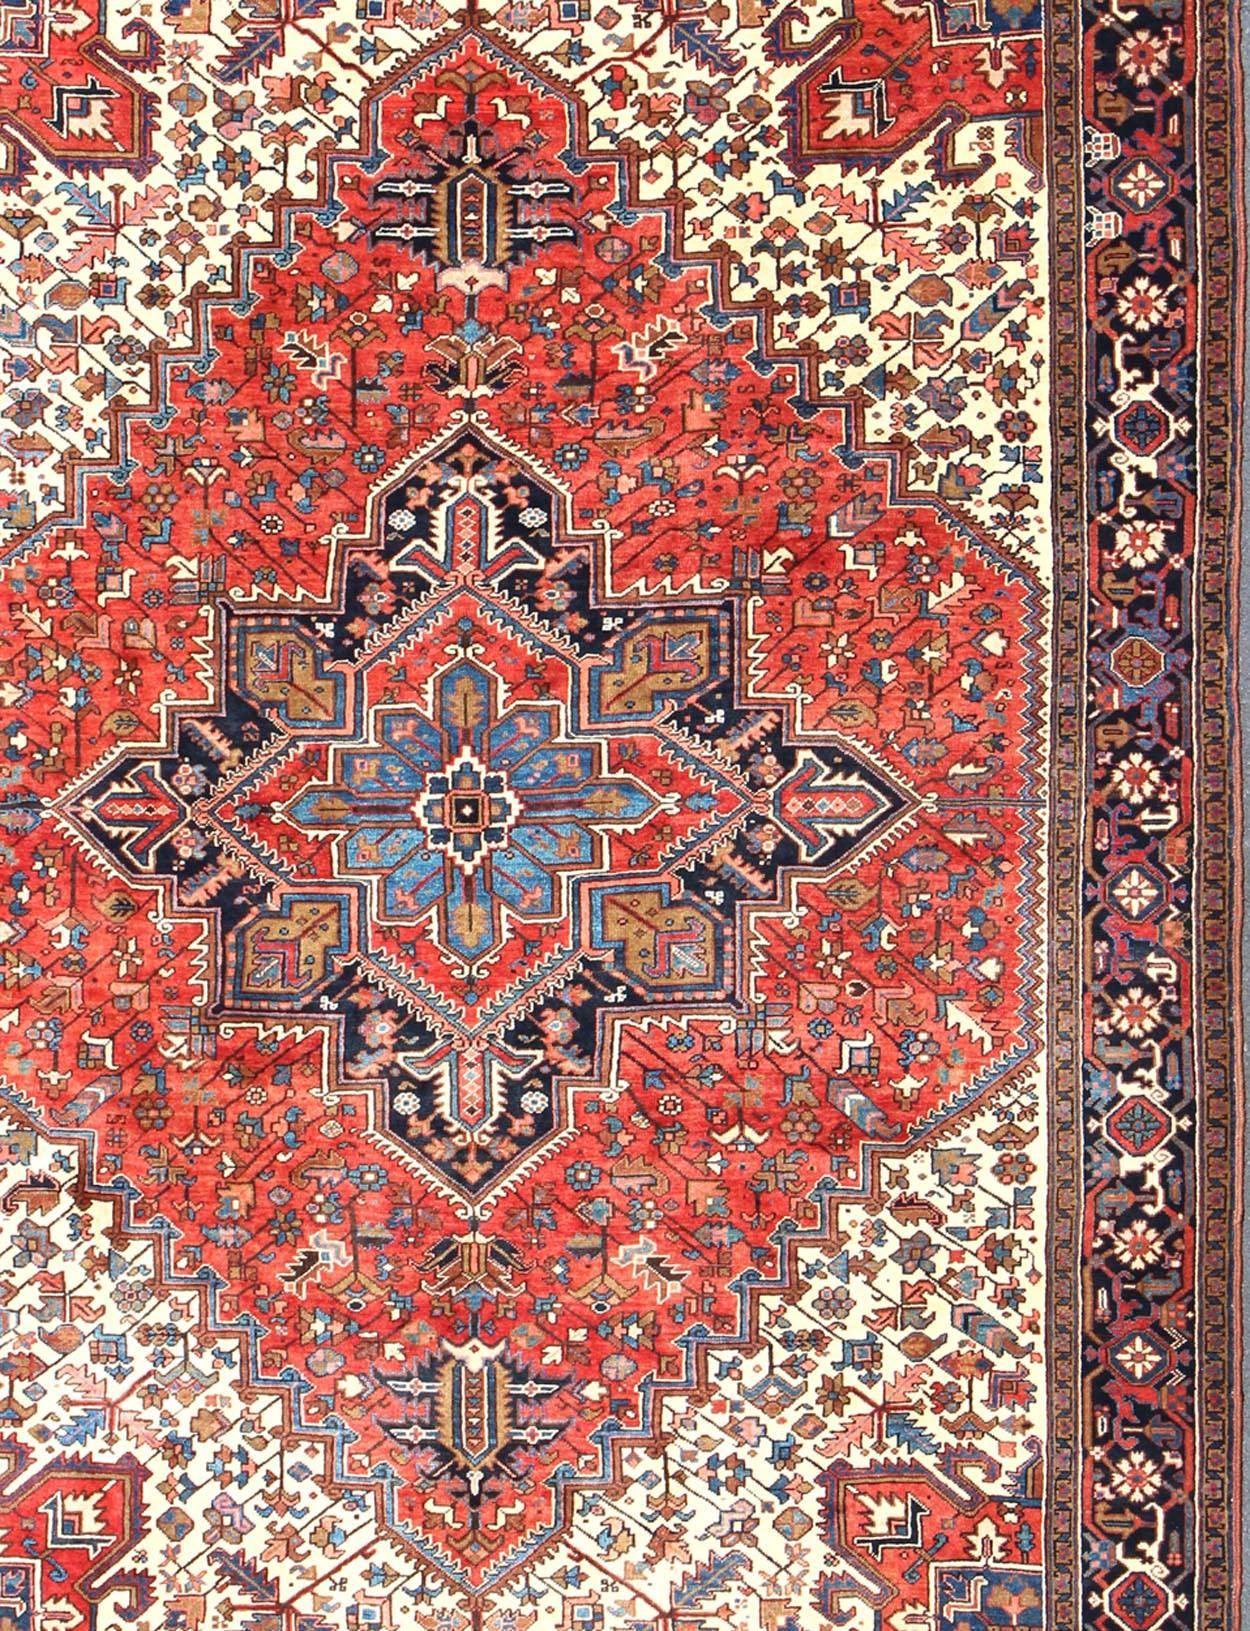 Hand-Knotted Semi Antique Persian Heriz Rug with Center Medallion Design in Rust Red and Blue